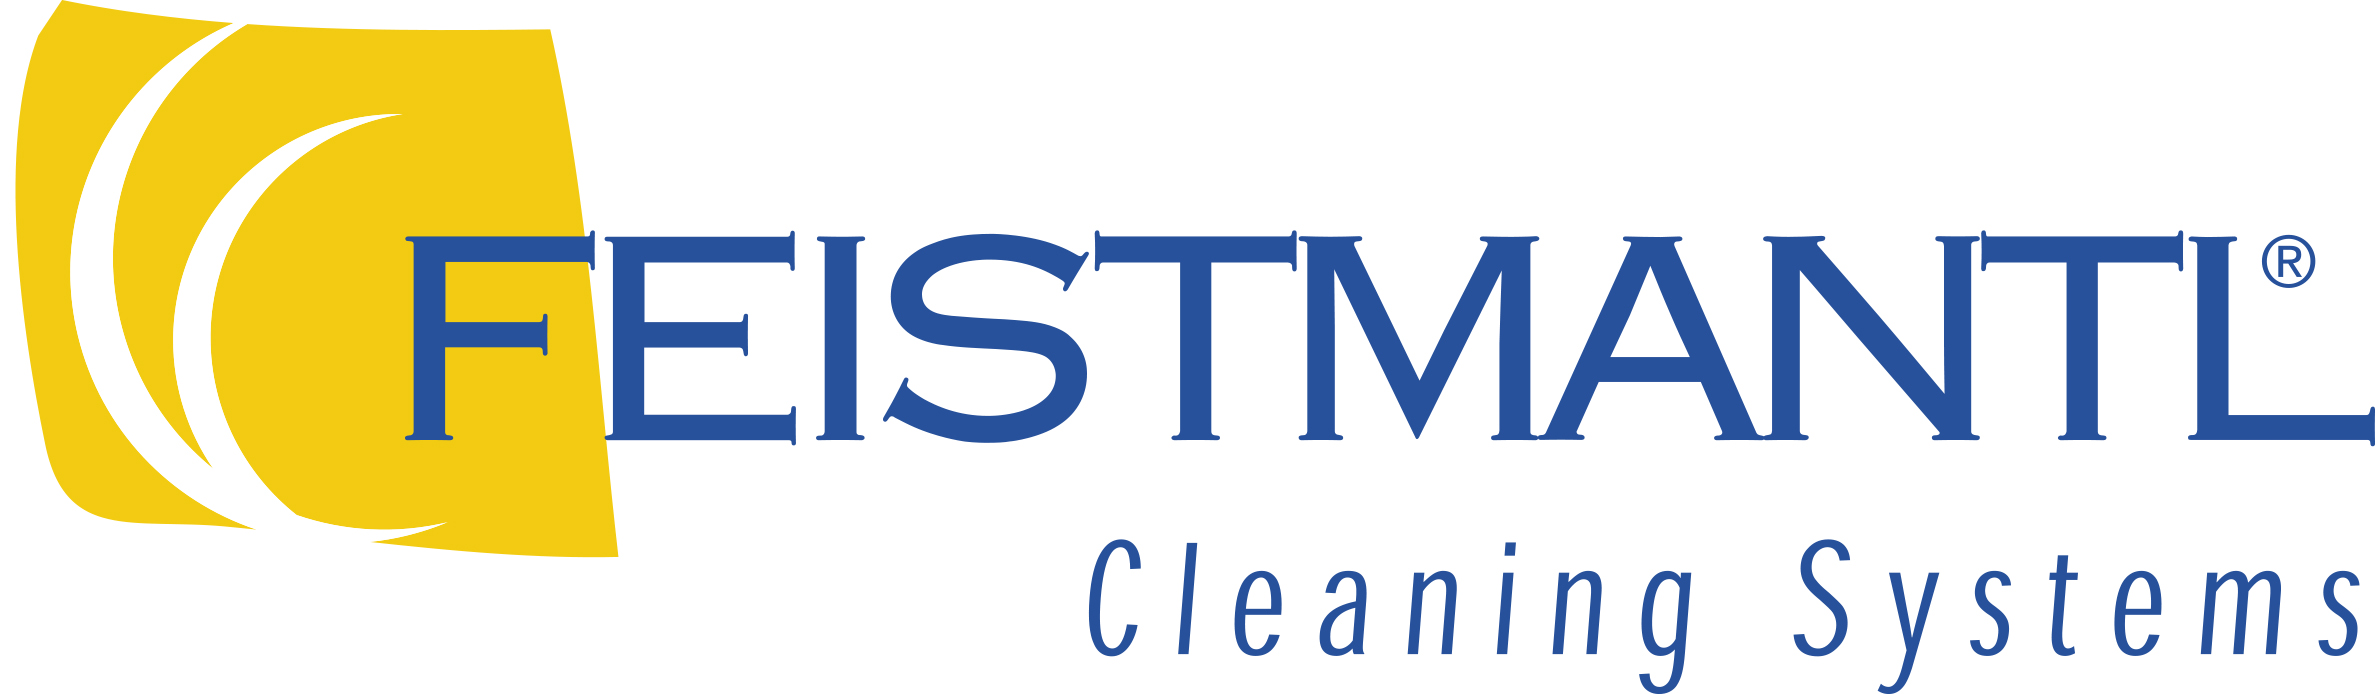 Feistmantl Cleaning Systems GmbH
